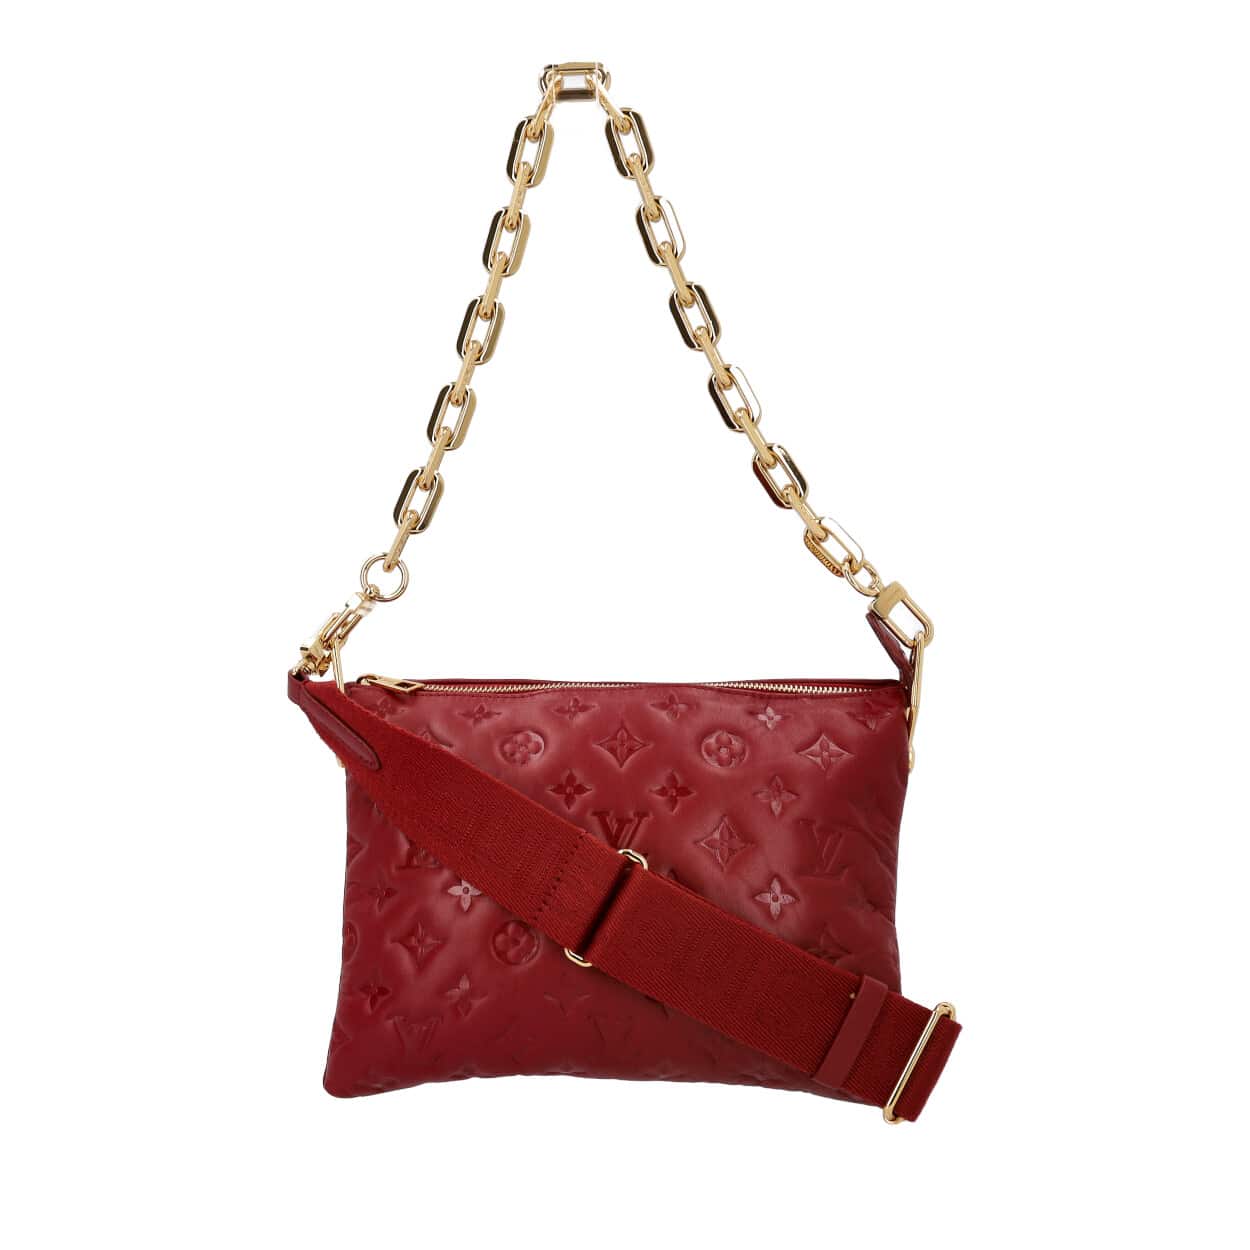 Louis Vuitton Coussin: the most searched for bag right now